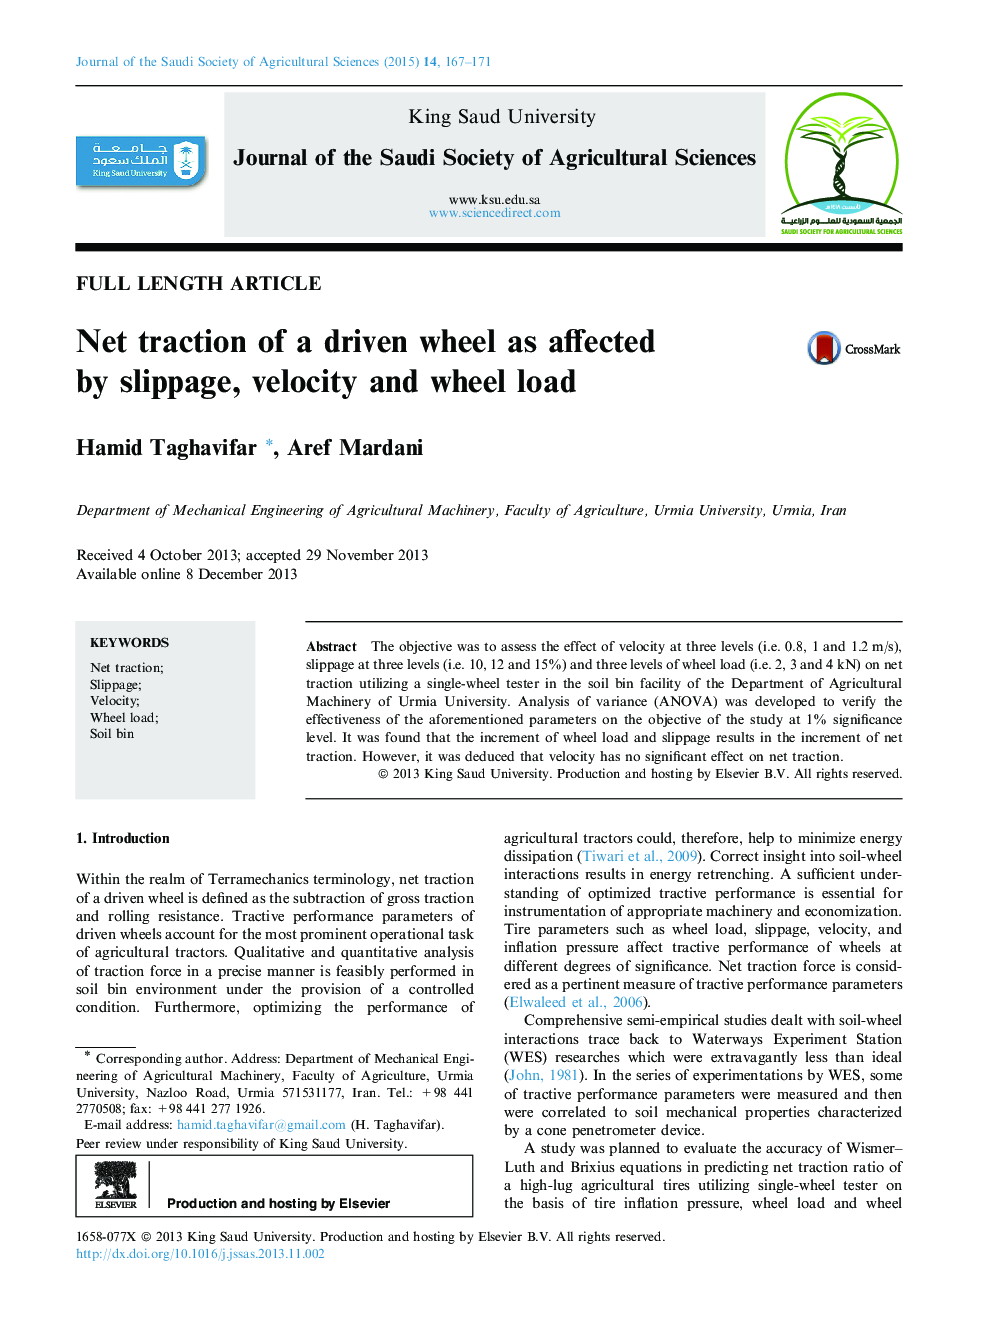 Net traction of a driven wheel as affected by slippage, velocity and wheel load 